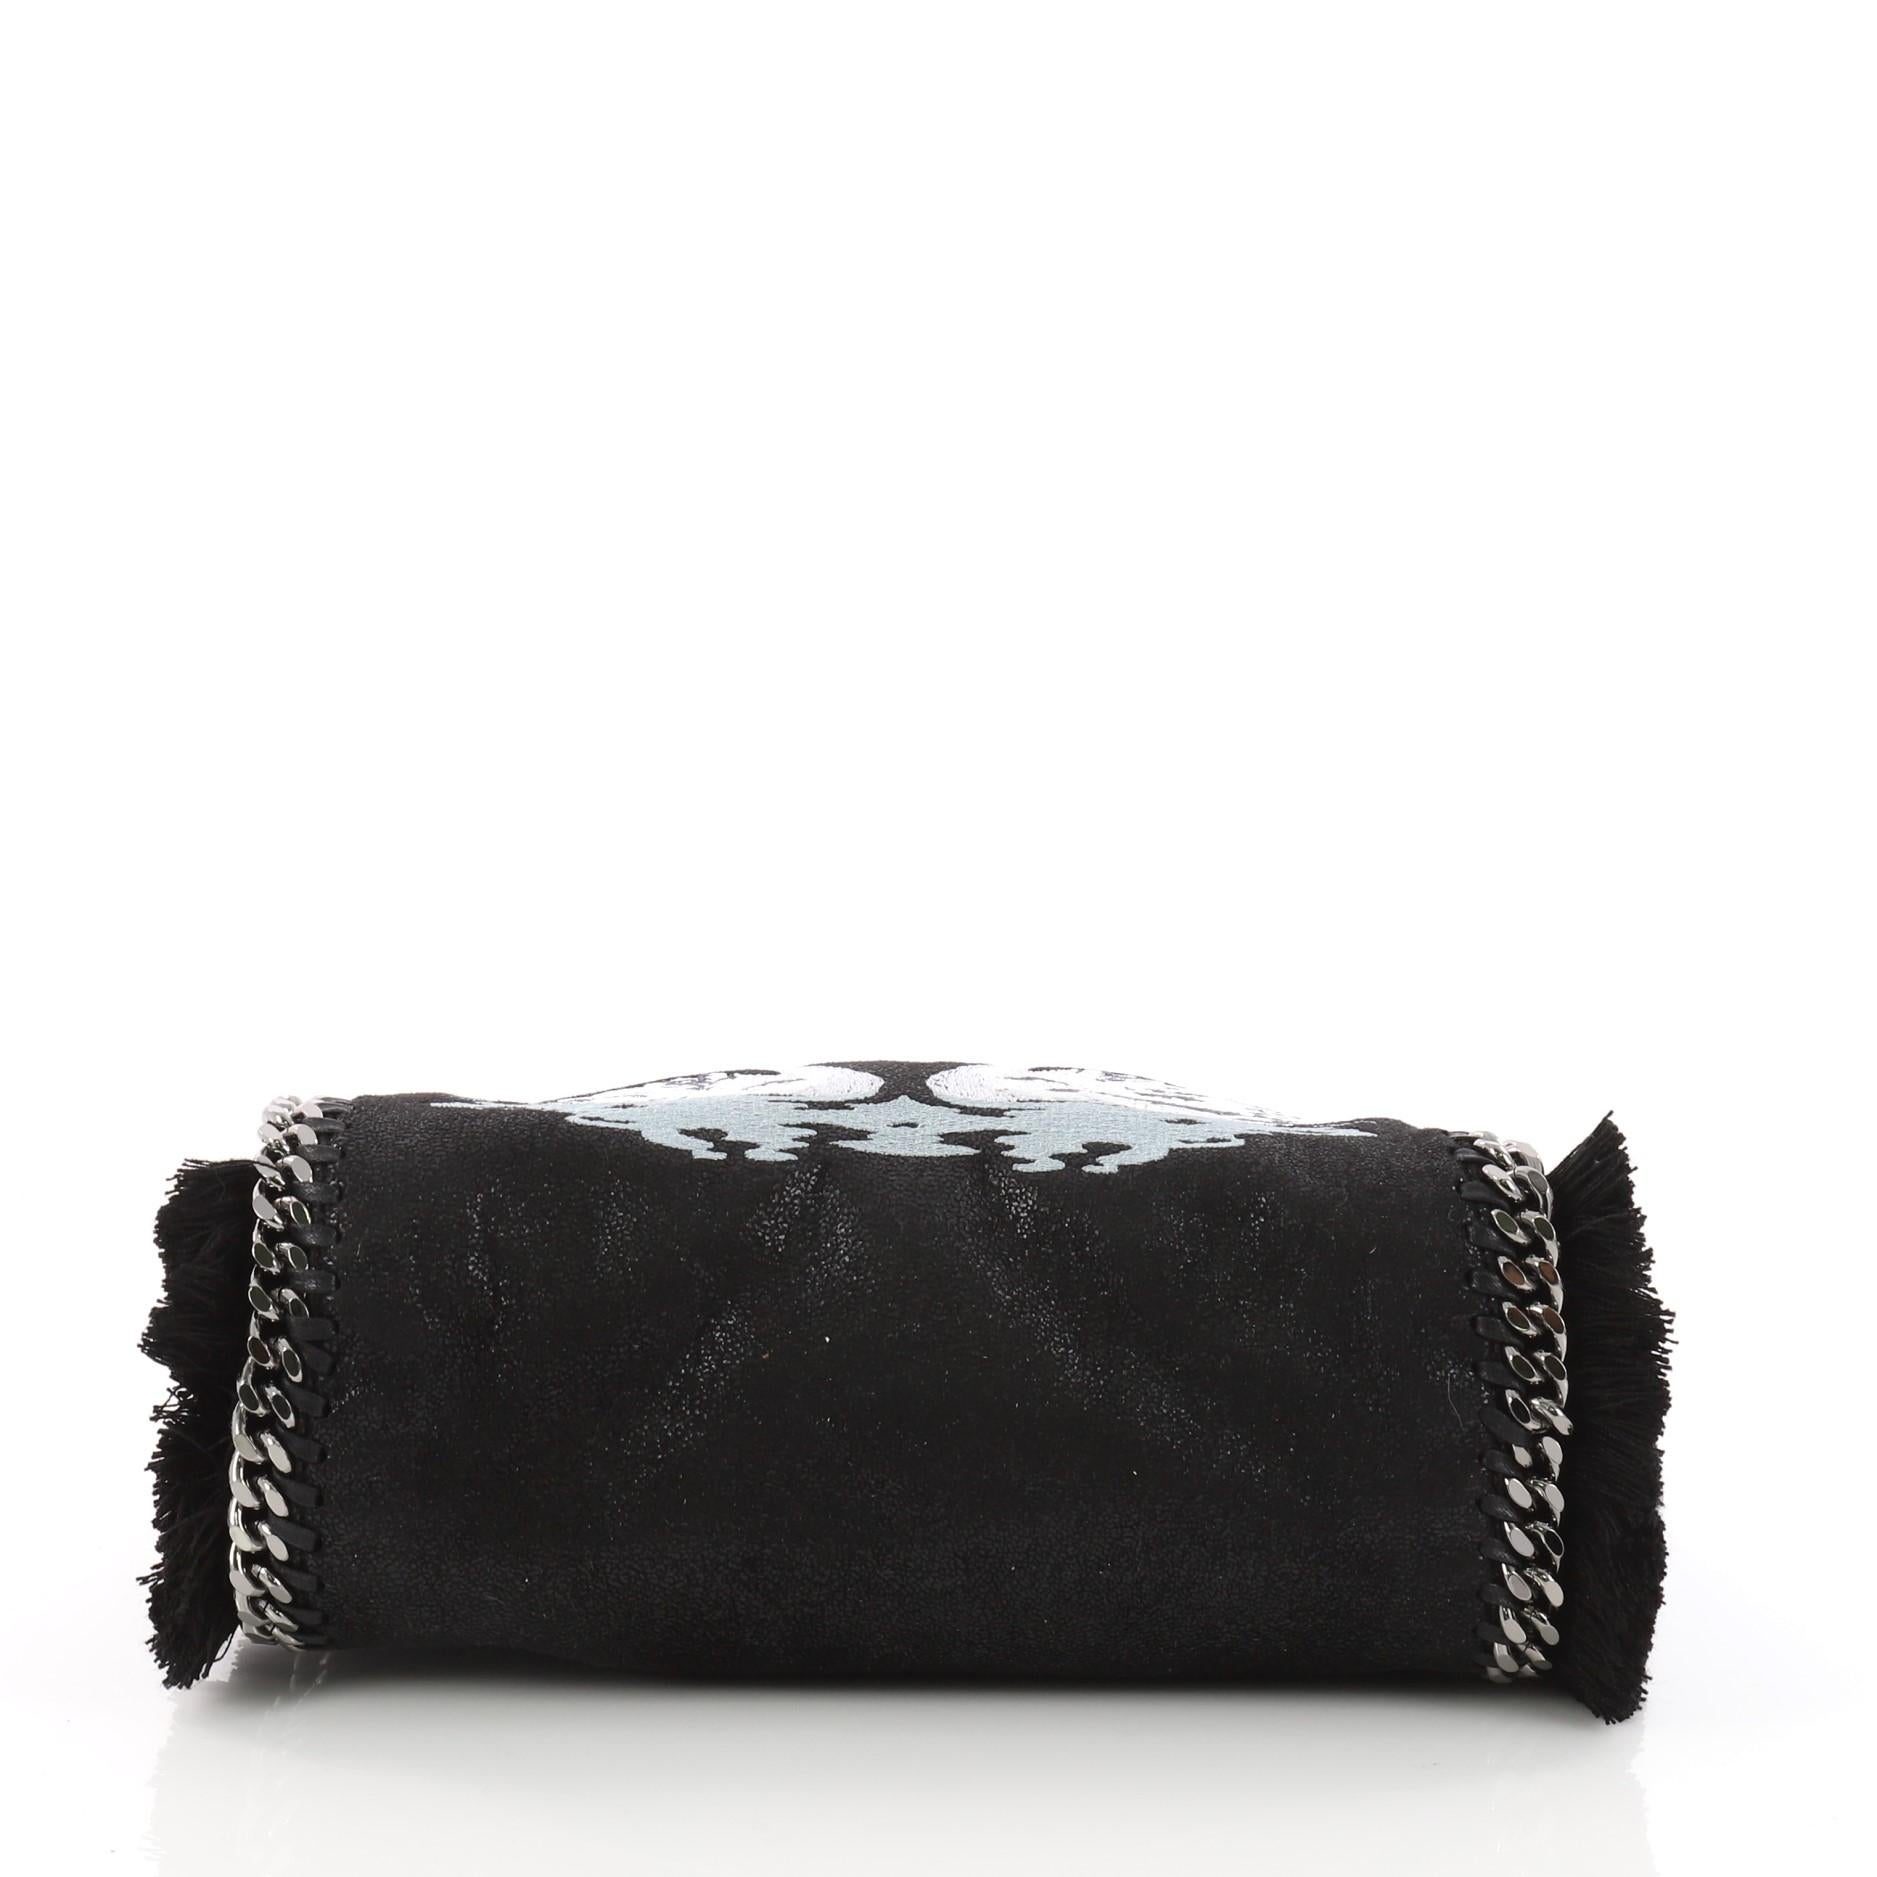 Black Stella McCartney Falabella Fold Over Crossbody Bag Embroidered Shaggy Deer with 